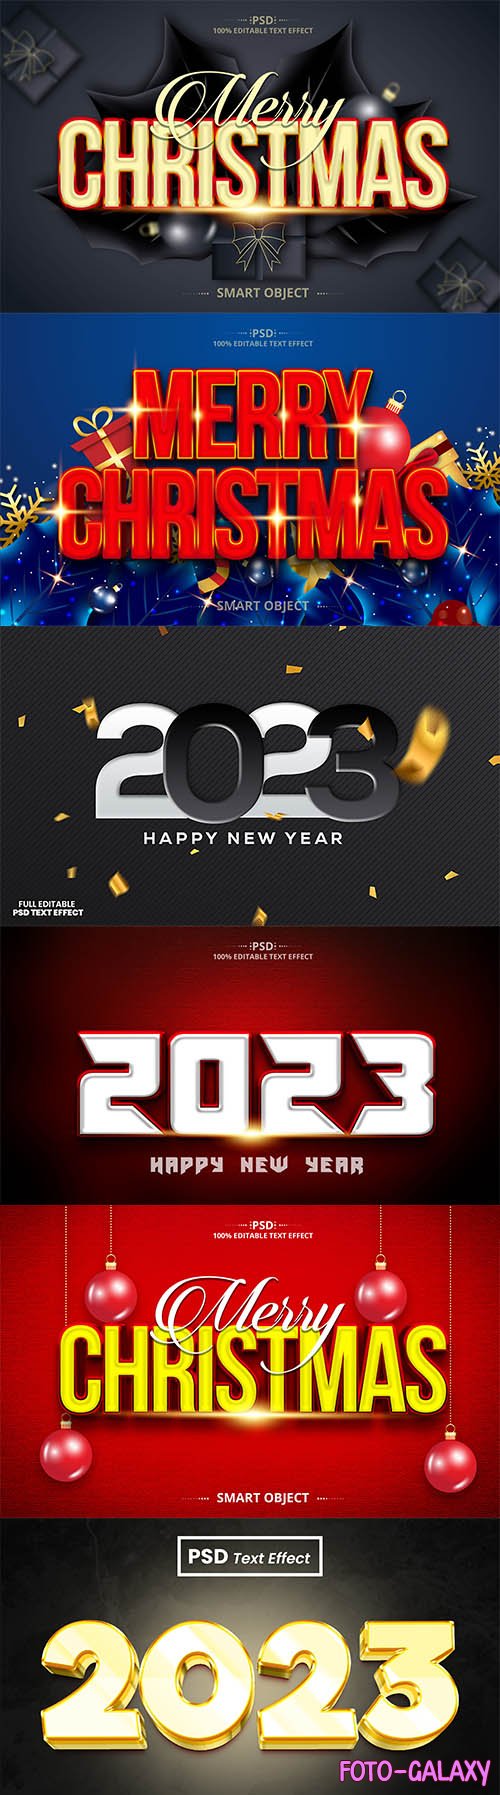 Christmas and 2023 style text effect in psd